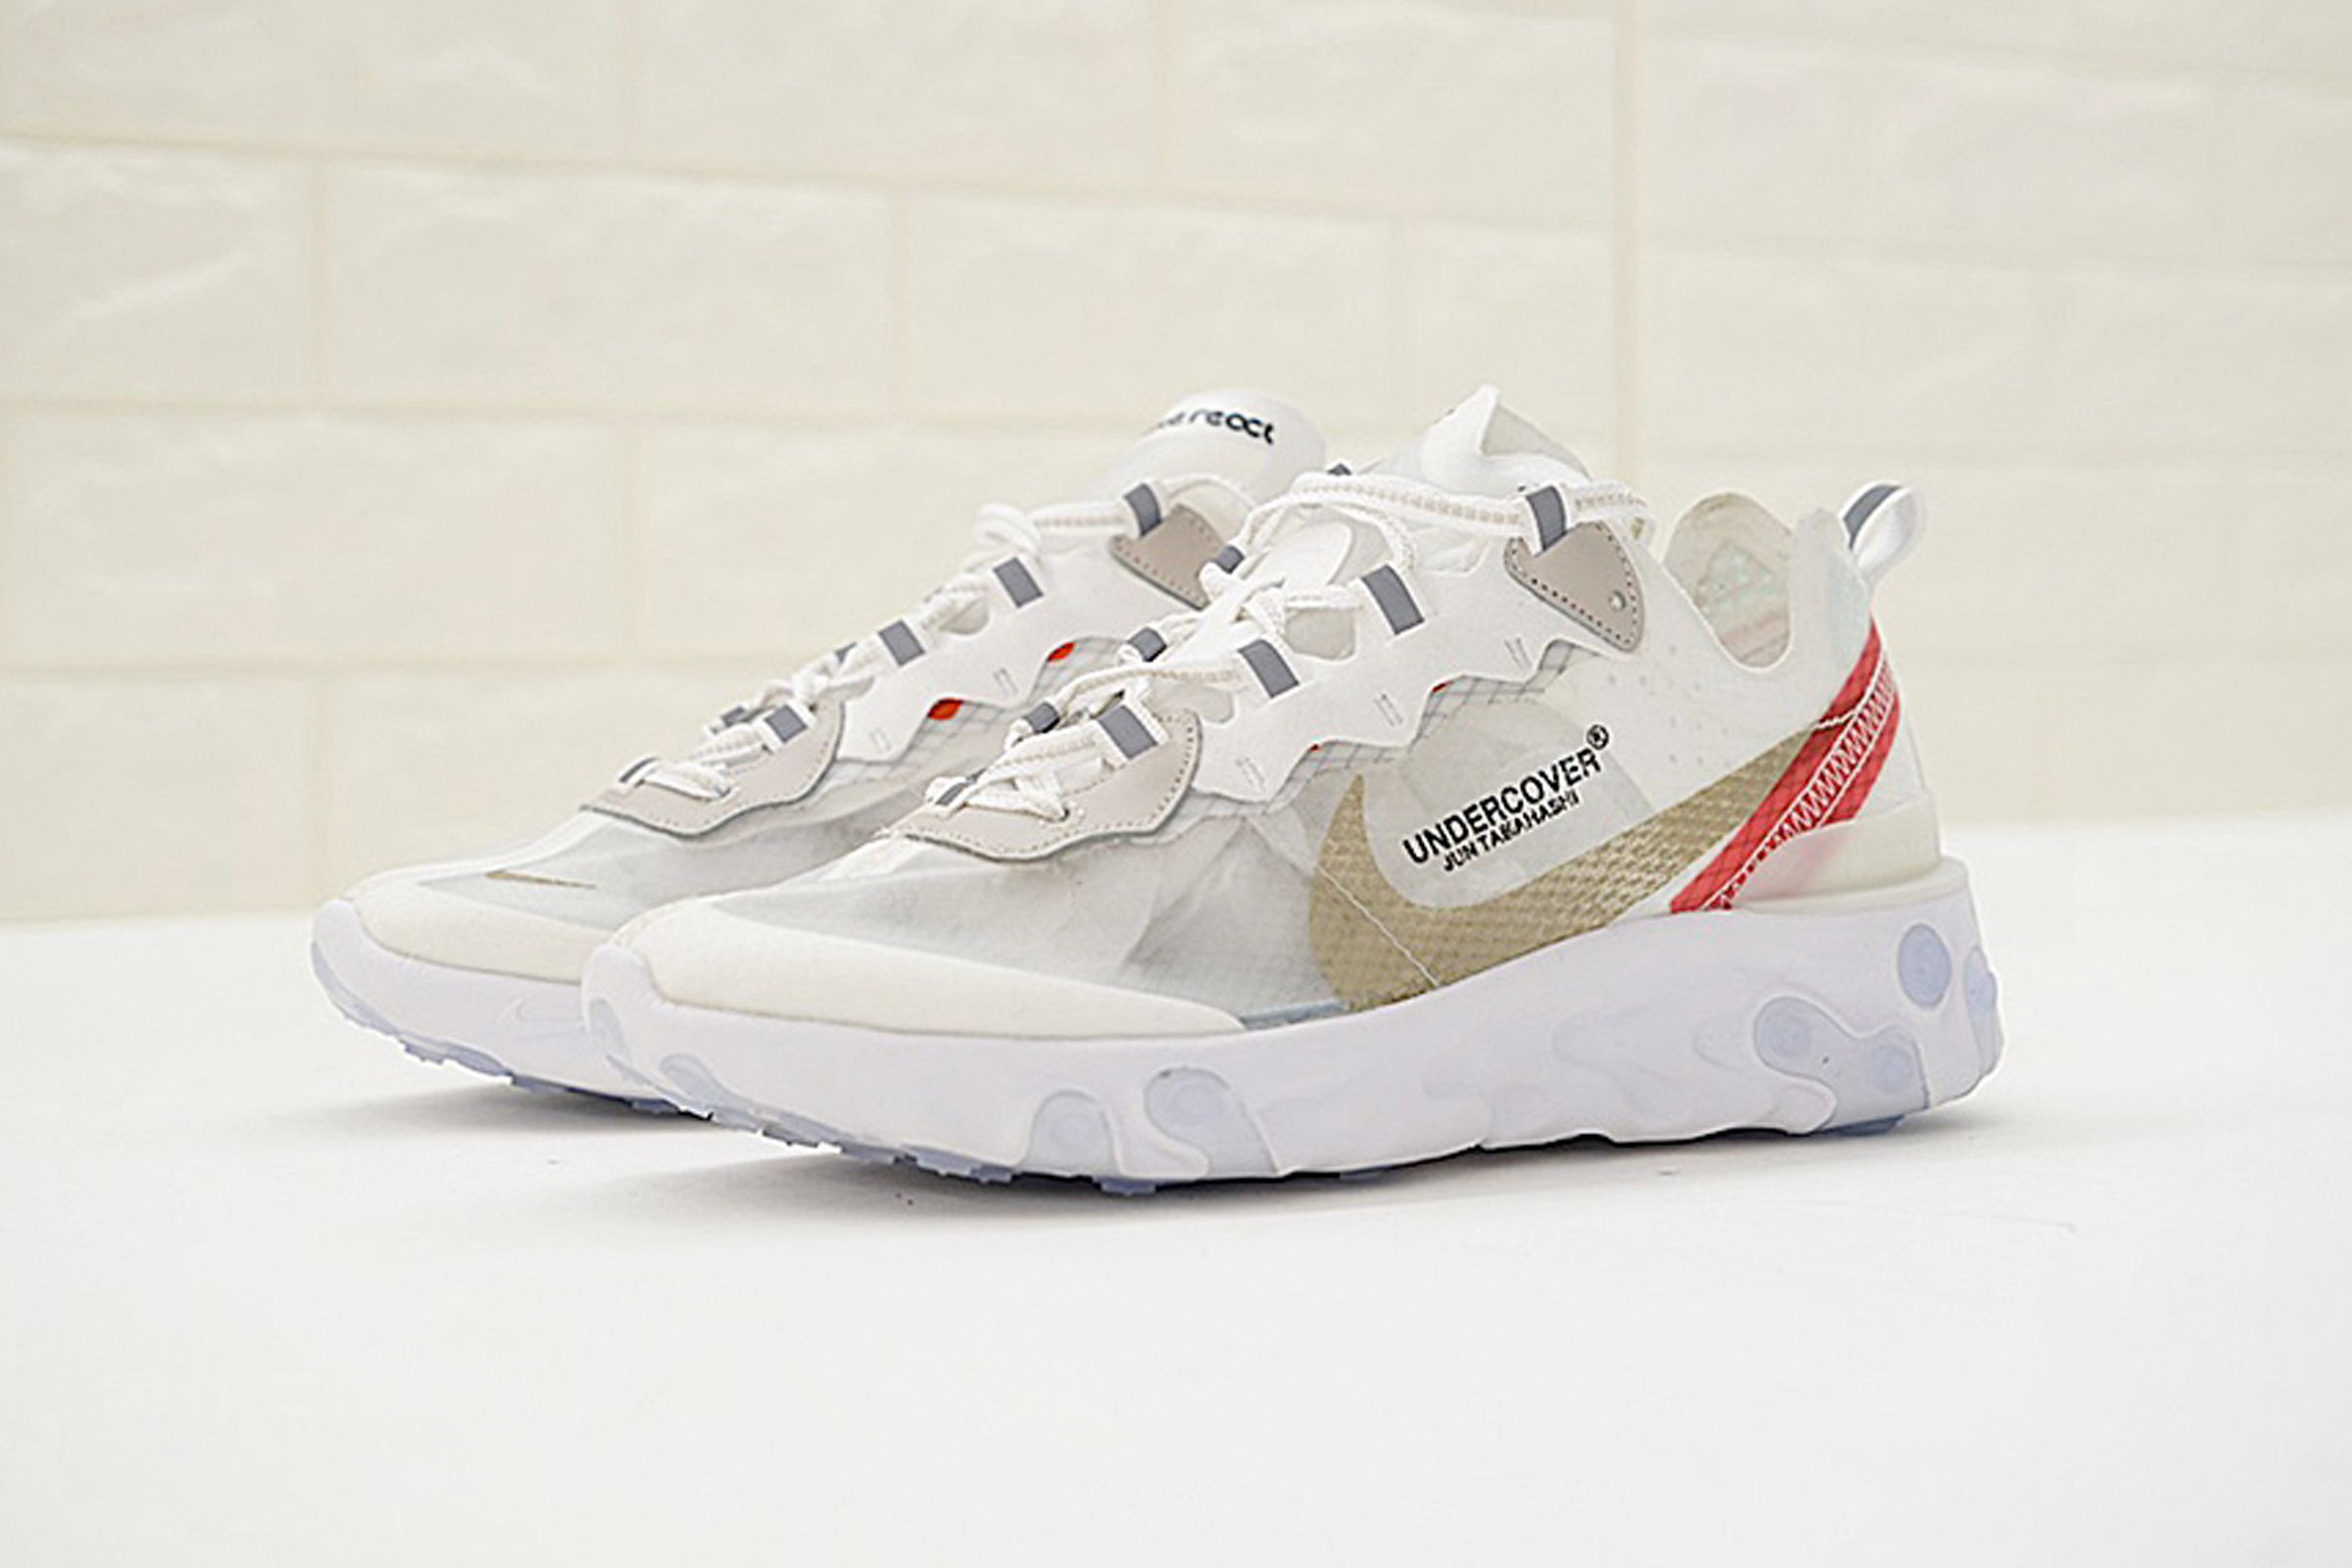 Undercover and Nike Tease New Colorways for the React Element 87